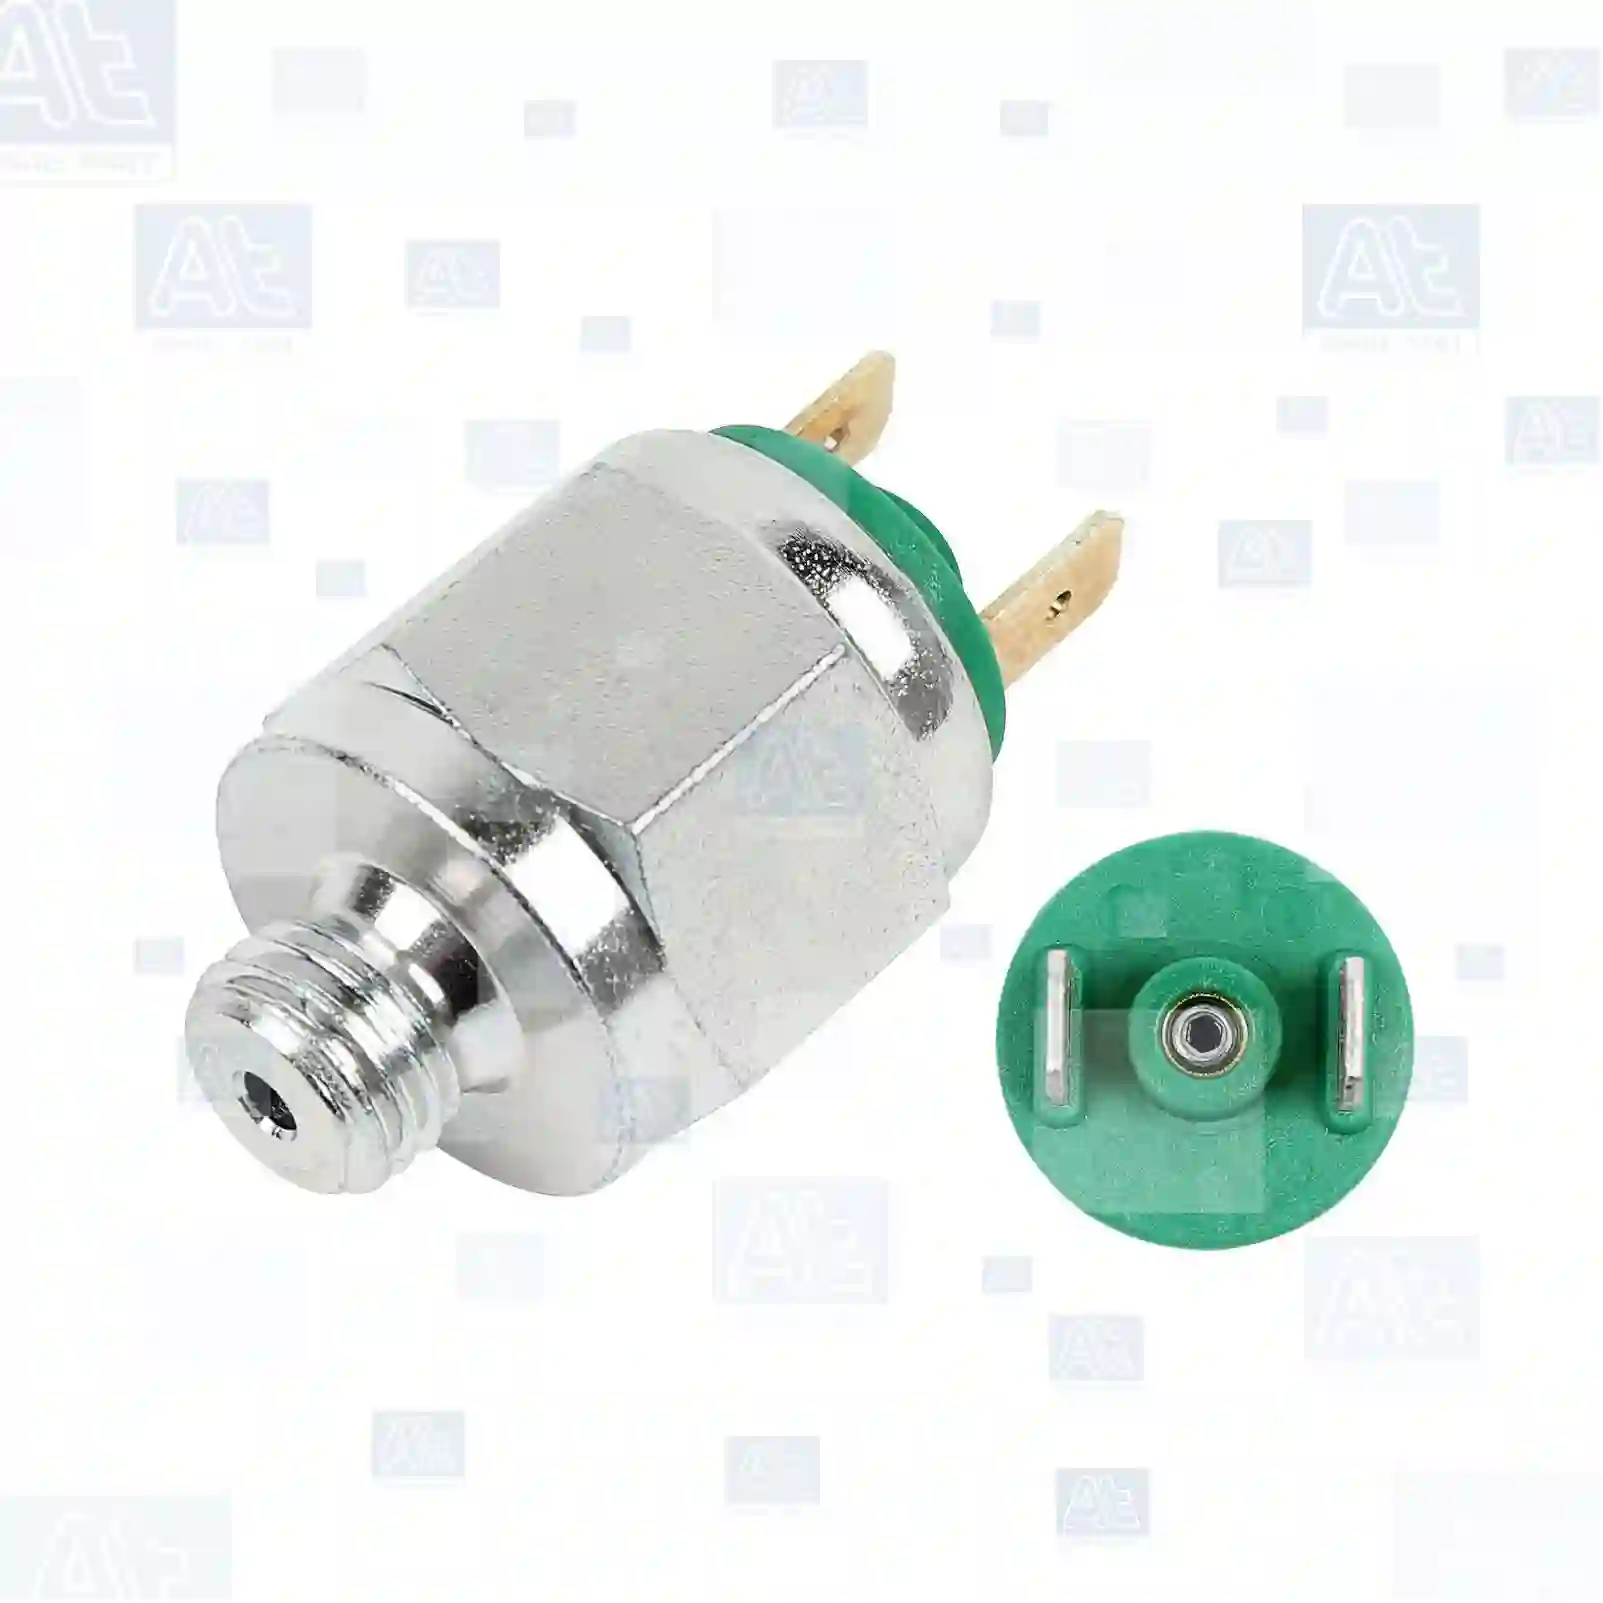 Pressure switch, at no 77710204, oem no: 1332000, 1504932, 1505470, ACHA101, 99700725031, 250045, 03435124, 03435125, 03455124, 3435124, 9441004004, 9441014004, 342025, 81255216013, 81255216019, 88255216208, 90810135242, K0002809687, 0007631710, 0015456024, 011017512, 110278600, 13C3508170AA, 9900005132AA, 5021170115, 1934563, 297807, 393101, 394328, 7314016000, 18026840, 21090340, 96906400, 637201260, 637205120, 1132028, 5236537, 6228623, 6628623, ZG20759-0008 At Spare Part | Engine, Accelerator Pedal, Camshaft, Connecting Rod, Crankcase, Crankshaft, Cylinder Head, Engine Suspension Mountings, Exhaust Manifold, Exhaust Gas Recirculation, Filter Kits, Flywheel Housing, General Overhaul Kits, Engine, Intake Manifold, Oil Cleaner, Oil Cooler, Oil Filter, Oil Pump, Oil Sump, Piston & Liner, Sensor & Switch, Timing Case, Turbocharger, Cooling System, Belt Tensioner, Coolant Filter, Coolant Pipe, Corrosion Prevention Agent, Drive, Expansion Tank, Fan, Intercooler, Monitors & Gauges, Radiator, Thermostat, V-Belt / Timing belt, Water Pump, Fuel System, Electronical Injector Unit, Feed Pump, Fuel Filter, cpl., Fuel Gauge Sender,  Fuel Line, Fuel Pump, Fuel Tank, Injection Line Kit, Injection Pump, Exhaust System, Clutch & Pedal, Gearbox, Propeller Shaft, Axles, Brake System, Hubs & Wheels, Suspension, Leaf Spring, Universal Parts / Accessories, Steering, Electrical System, Cabin Pressure switch, at no 77710204, oem no: 1332000, 1504932, 1505470, ACHA101, 99700725031, 250045, 03435124, 03435125, 03455124, 3435124, 9441004004, 9441014004, 342025, 81255216013, 81255216019, 88255216208, 90810135242, K0002809687, 0007631710, 0015456024, 011017512, 110278600, 13C3508170AA, 9900005132AA, 5021170115, 1934563, 297807, 393101, 394328, 7314016000, 18026840, 21090340, 96906400, 637201260, 637205120, 1132028, 5236537, 6228623, 6628623, ZG20759-0008 At Spare Part | Engine, Accelerator Pedal, Camshaft, Connecting Rod, Crankcase, Crankshaft, Cylinder Head, Engine Suspension Mountings, Exhaust Manifold, Exhaust Gas Recirculation, Filter Kits, Flywheel Housing, General Overhaul Kits, Engine, Intake Manifold, Oil Cleaner, Oil Cooler, Oil Filter, Oil Pump, Oil Sump, Piston & Liner, Sensor & Switch, Timing Case, Turbocharger, Cooling System, Belt Tensioner, Coolant Filter, Coolant Pipe, Corrosion Prevention Agent, Drive, Expansion Tank, Fan, Intercooler, Monitors & Gauges, Radiator, Thermostat, V-Belt / Timing belt, Water Pump, Fuel System, Electronical Injector Unit, Feed Pump, Fuel Filter, cpl., Fuel Gauge Sender,  Fuel Line, Fuel Pump, Fuel Tank, Injection Line Kit, Injection Pump, Exhaust System, Clutch & Pedal, Gearbox, Propeller Shaft, Axles, Brake System, Hubs & Wheels, Suspension, Leaf Spring, Universal Parts / Accessories, Steering, Electrical System, Cabin